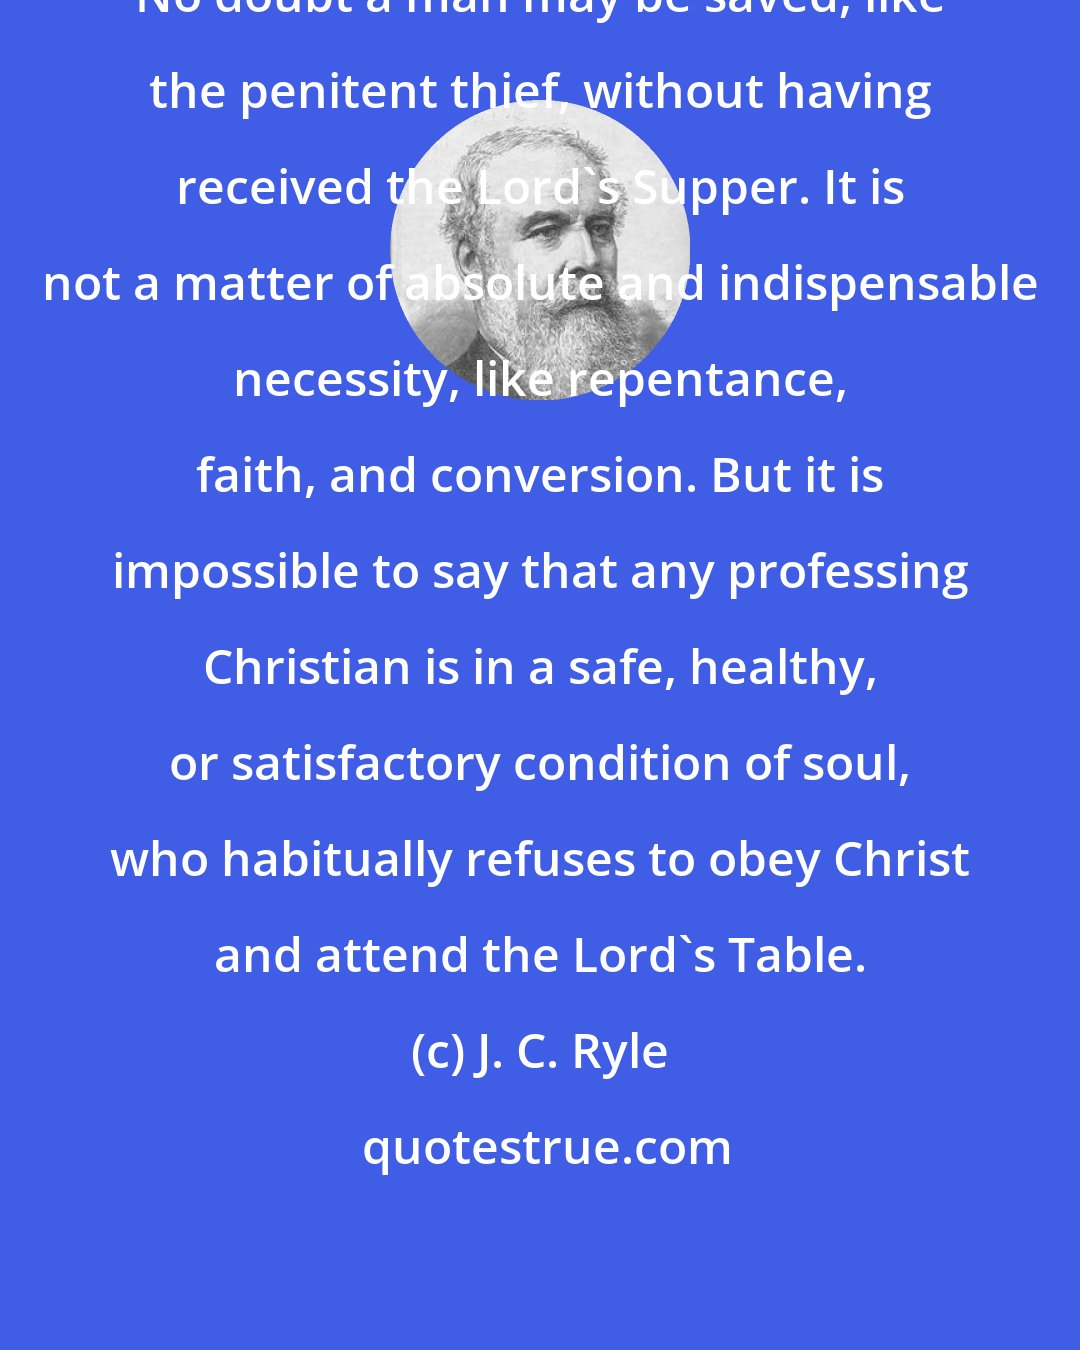 J. C. Ryle: No doubt a man may be saved, like the penitent thief, without having received the Lord's Supper. It is not a matter of absolute and indispensable necessity, like repentance, faith, and conversion. But it is impossible to say that any professing Christian is in a safe, healthy, or satisfactory condition of soul, who habitually refuses to obey Christ and attend the Lord's Table.